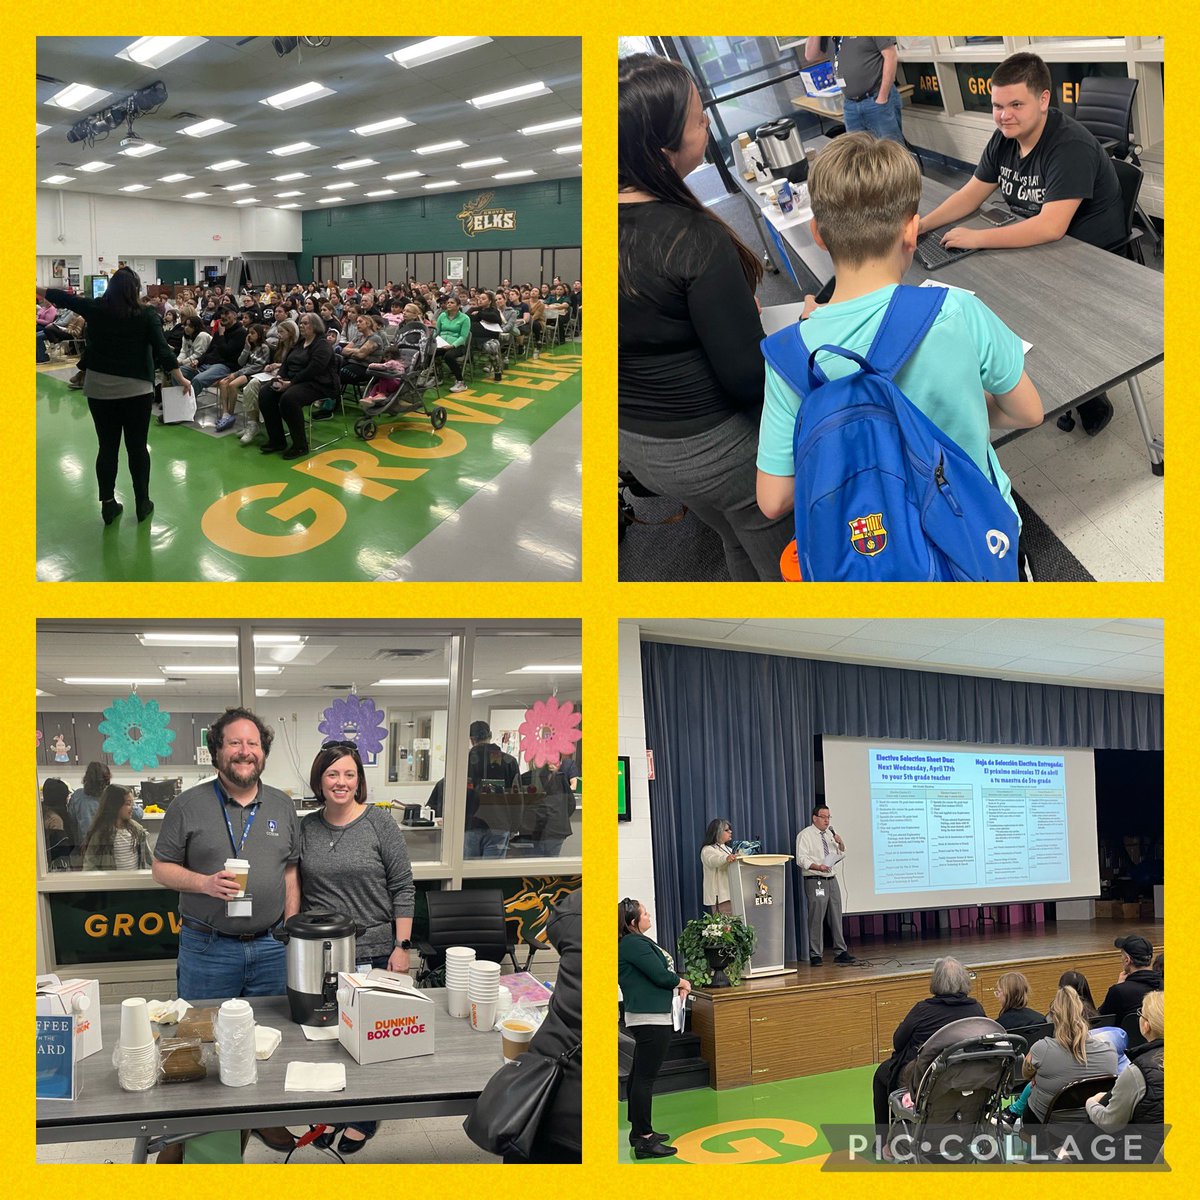 We met our incoming 6th graders and their families tonight at orientation. Our student council president, board members and PTO were there to support us! Can’t wait until you are officially Grove Elks! #1district1team